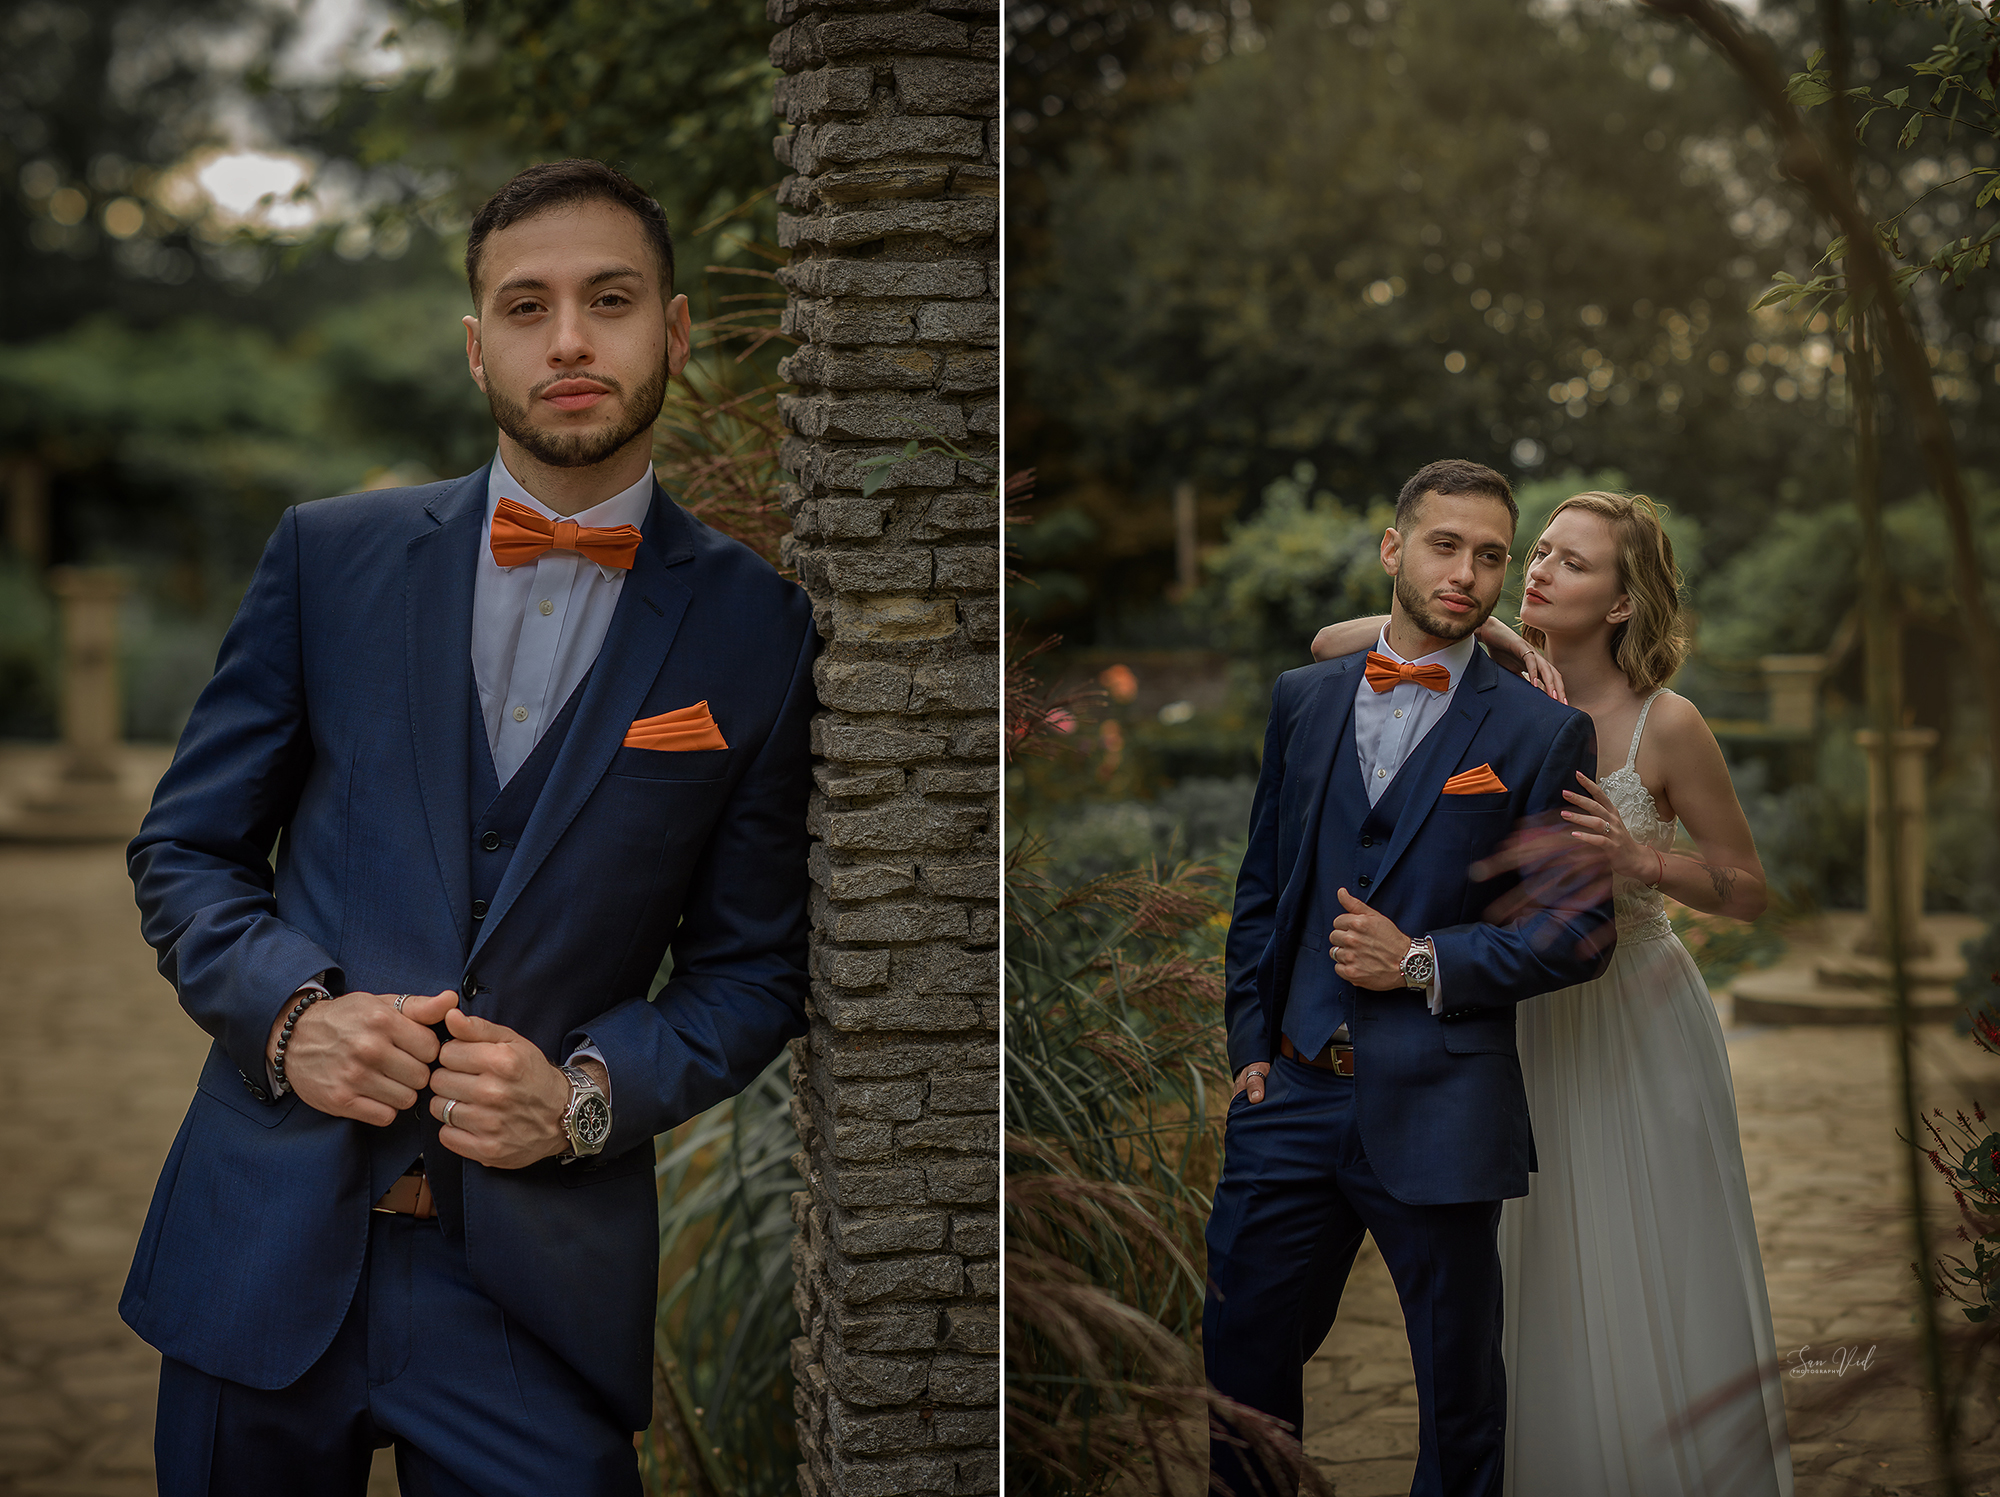 Creative Wedding Photography Bride and Groom The Rookery Park London